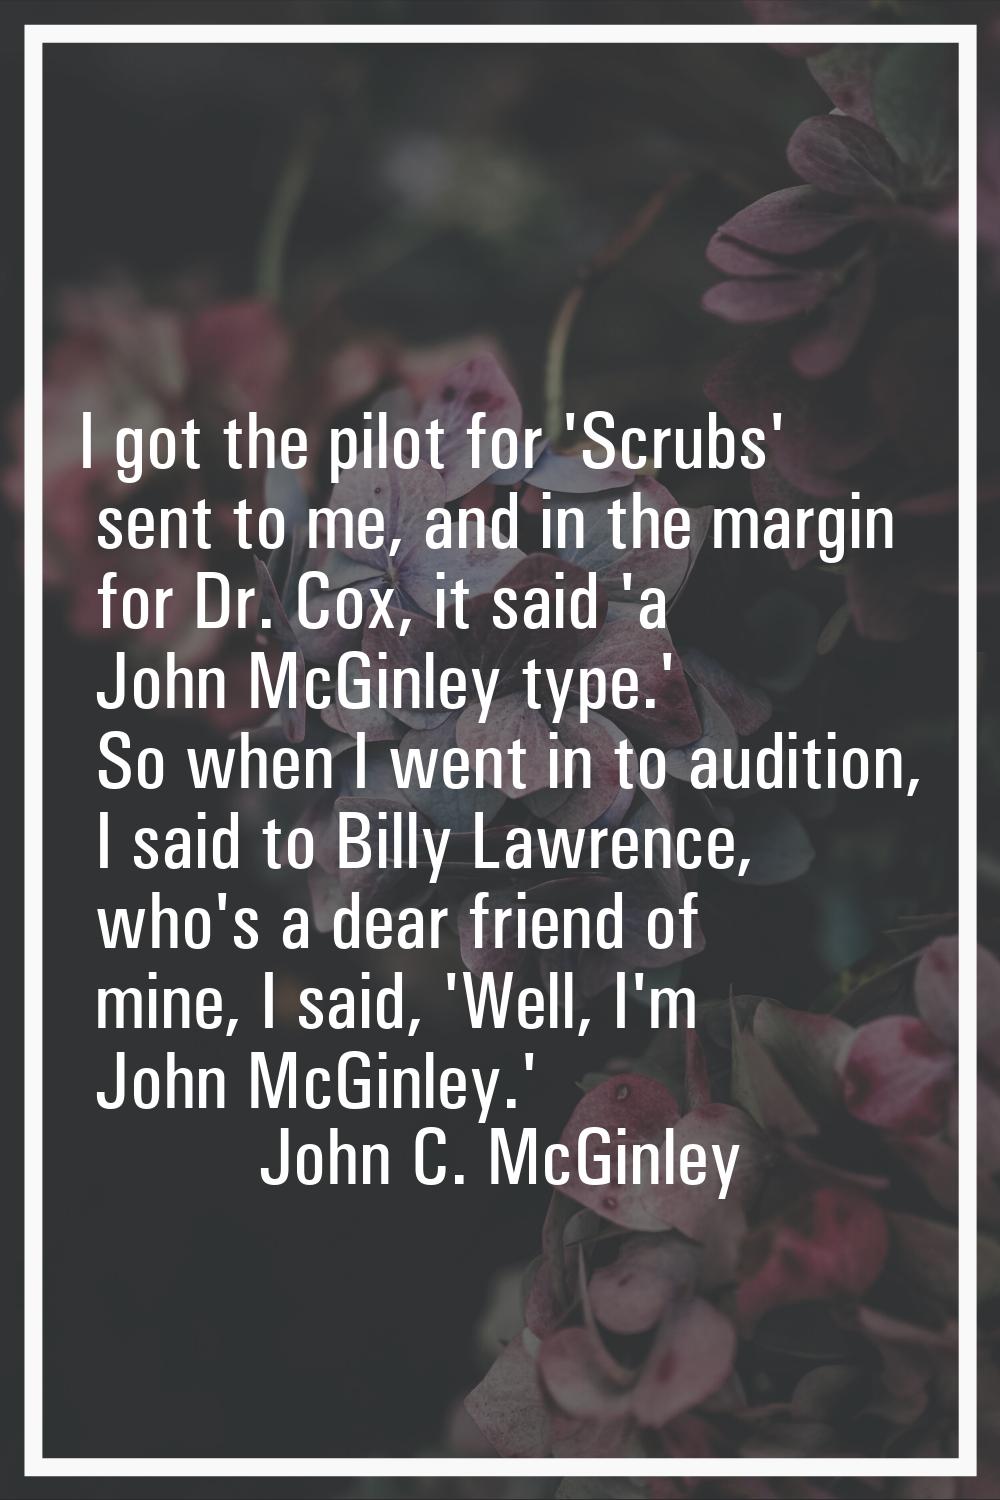 I got the pilot for 'Scrubs' sent to me, and in the margin for Dr. Cox, it said 'a John McGinley ty